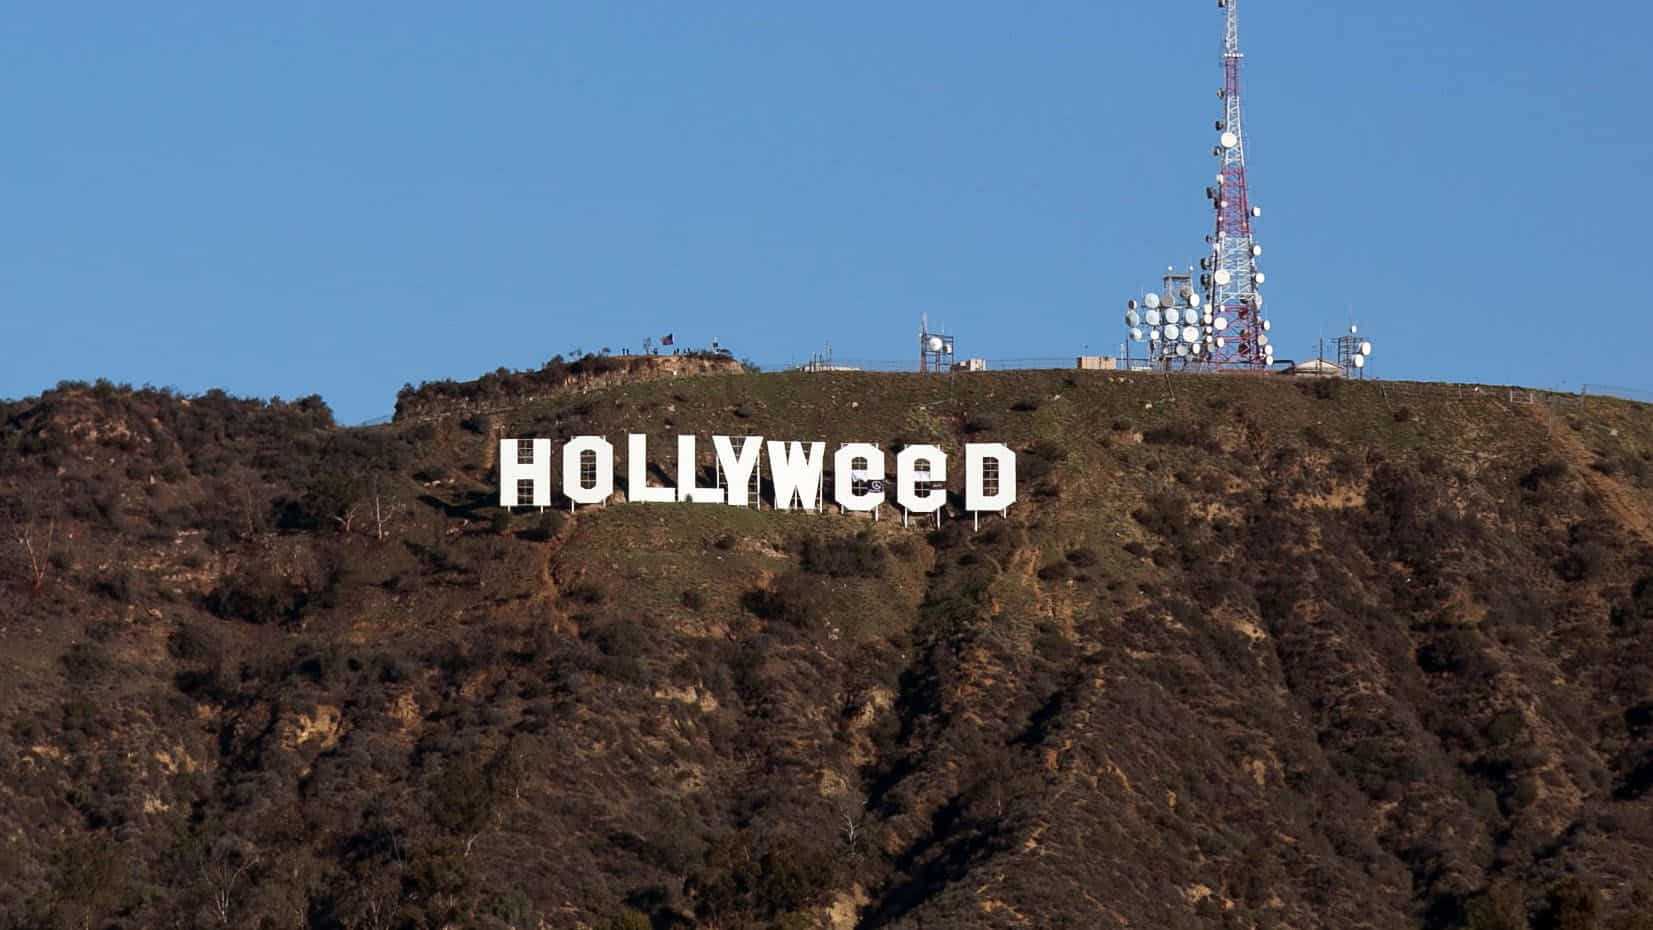 Hollyweed sign. Hollywood sign prank turned into Hollyweed. 